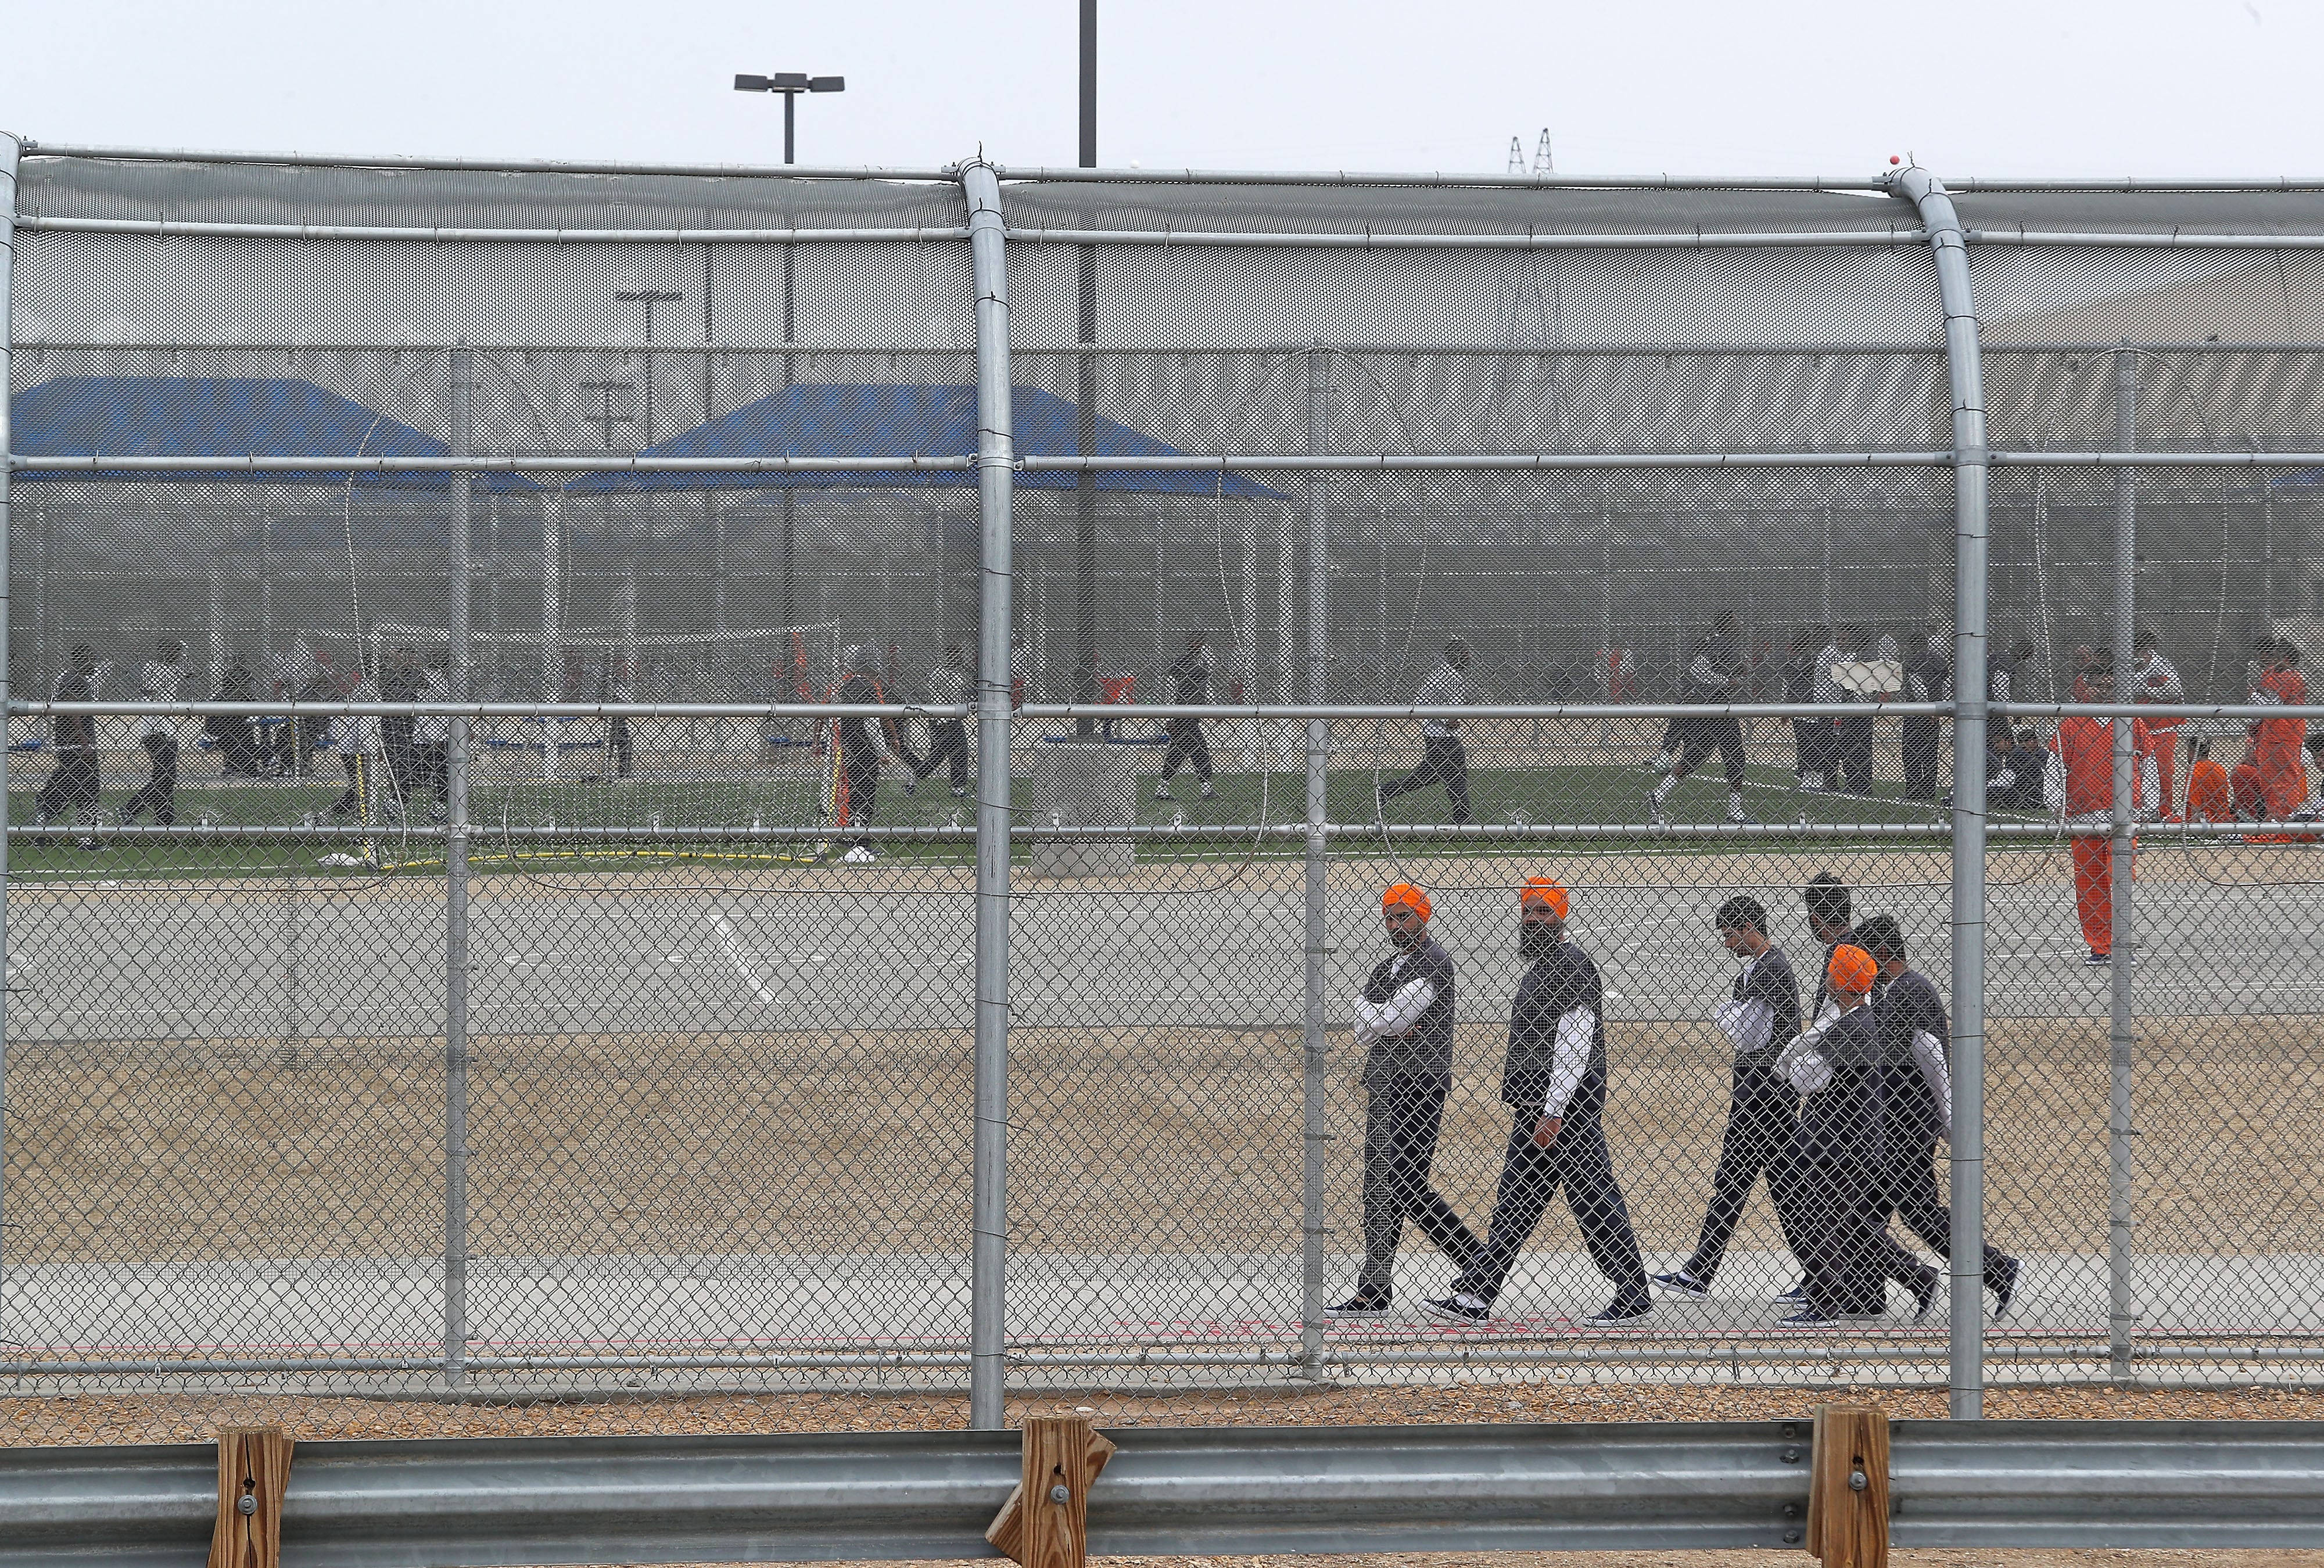 Detainees walk around outside at the U.S. Immigration and Customs Enforcement's Adelanto Processing Center in Adelanto.